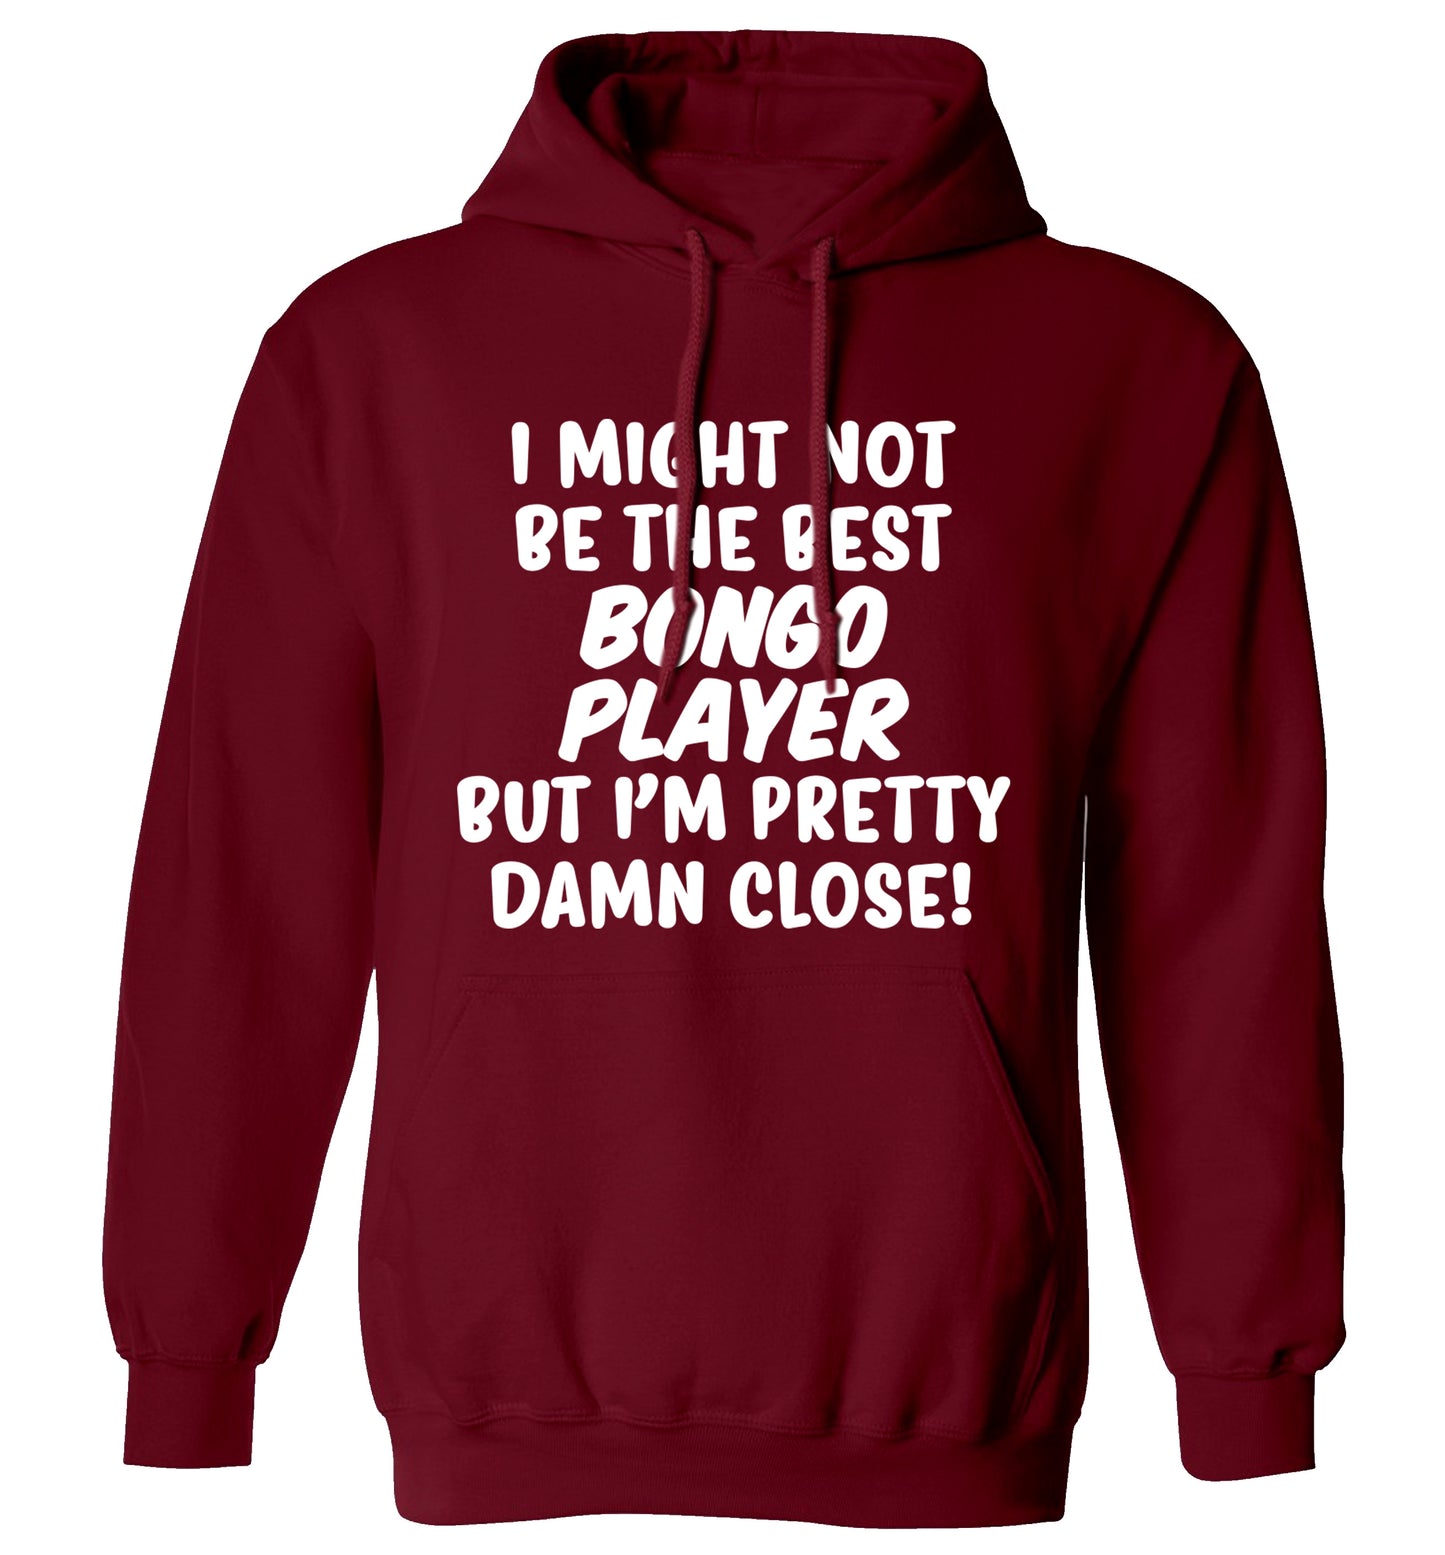 I might not be the best bongo player but I'm pretty close! adults unisexmaroon hoodie 2XL